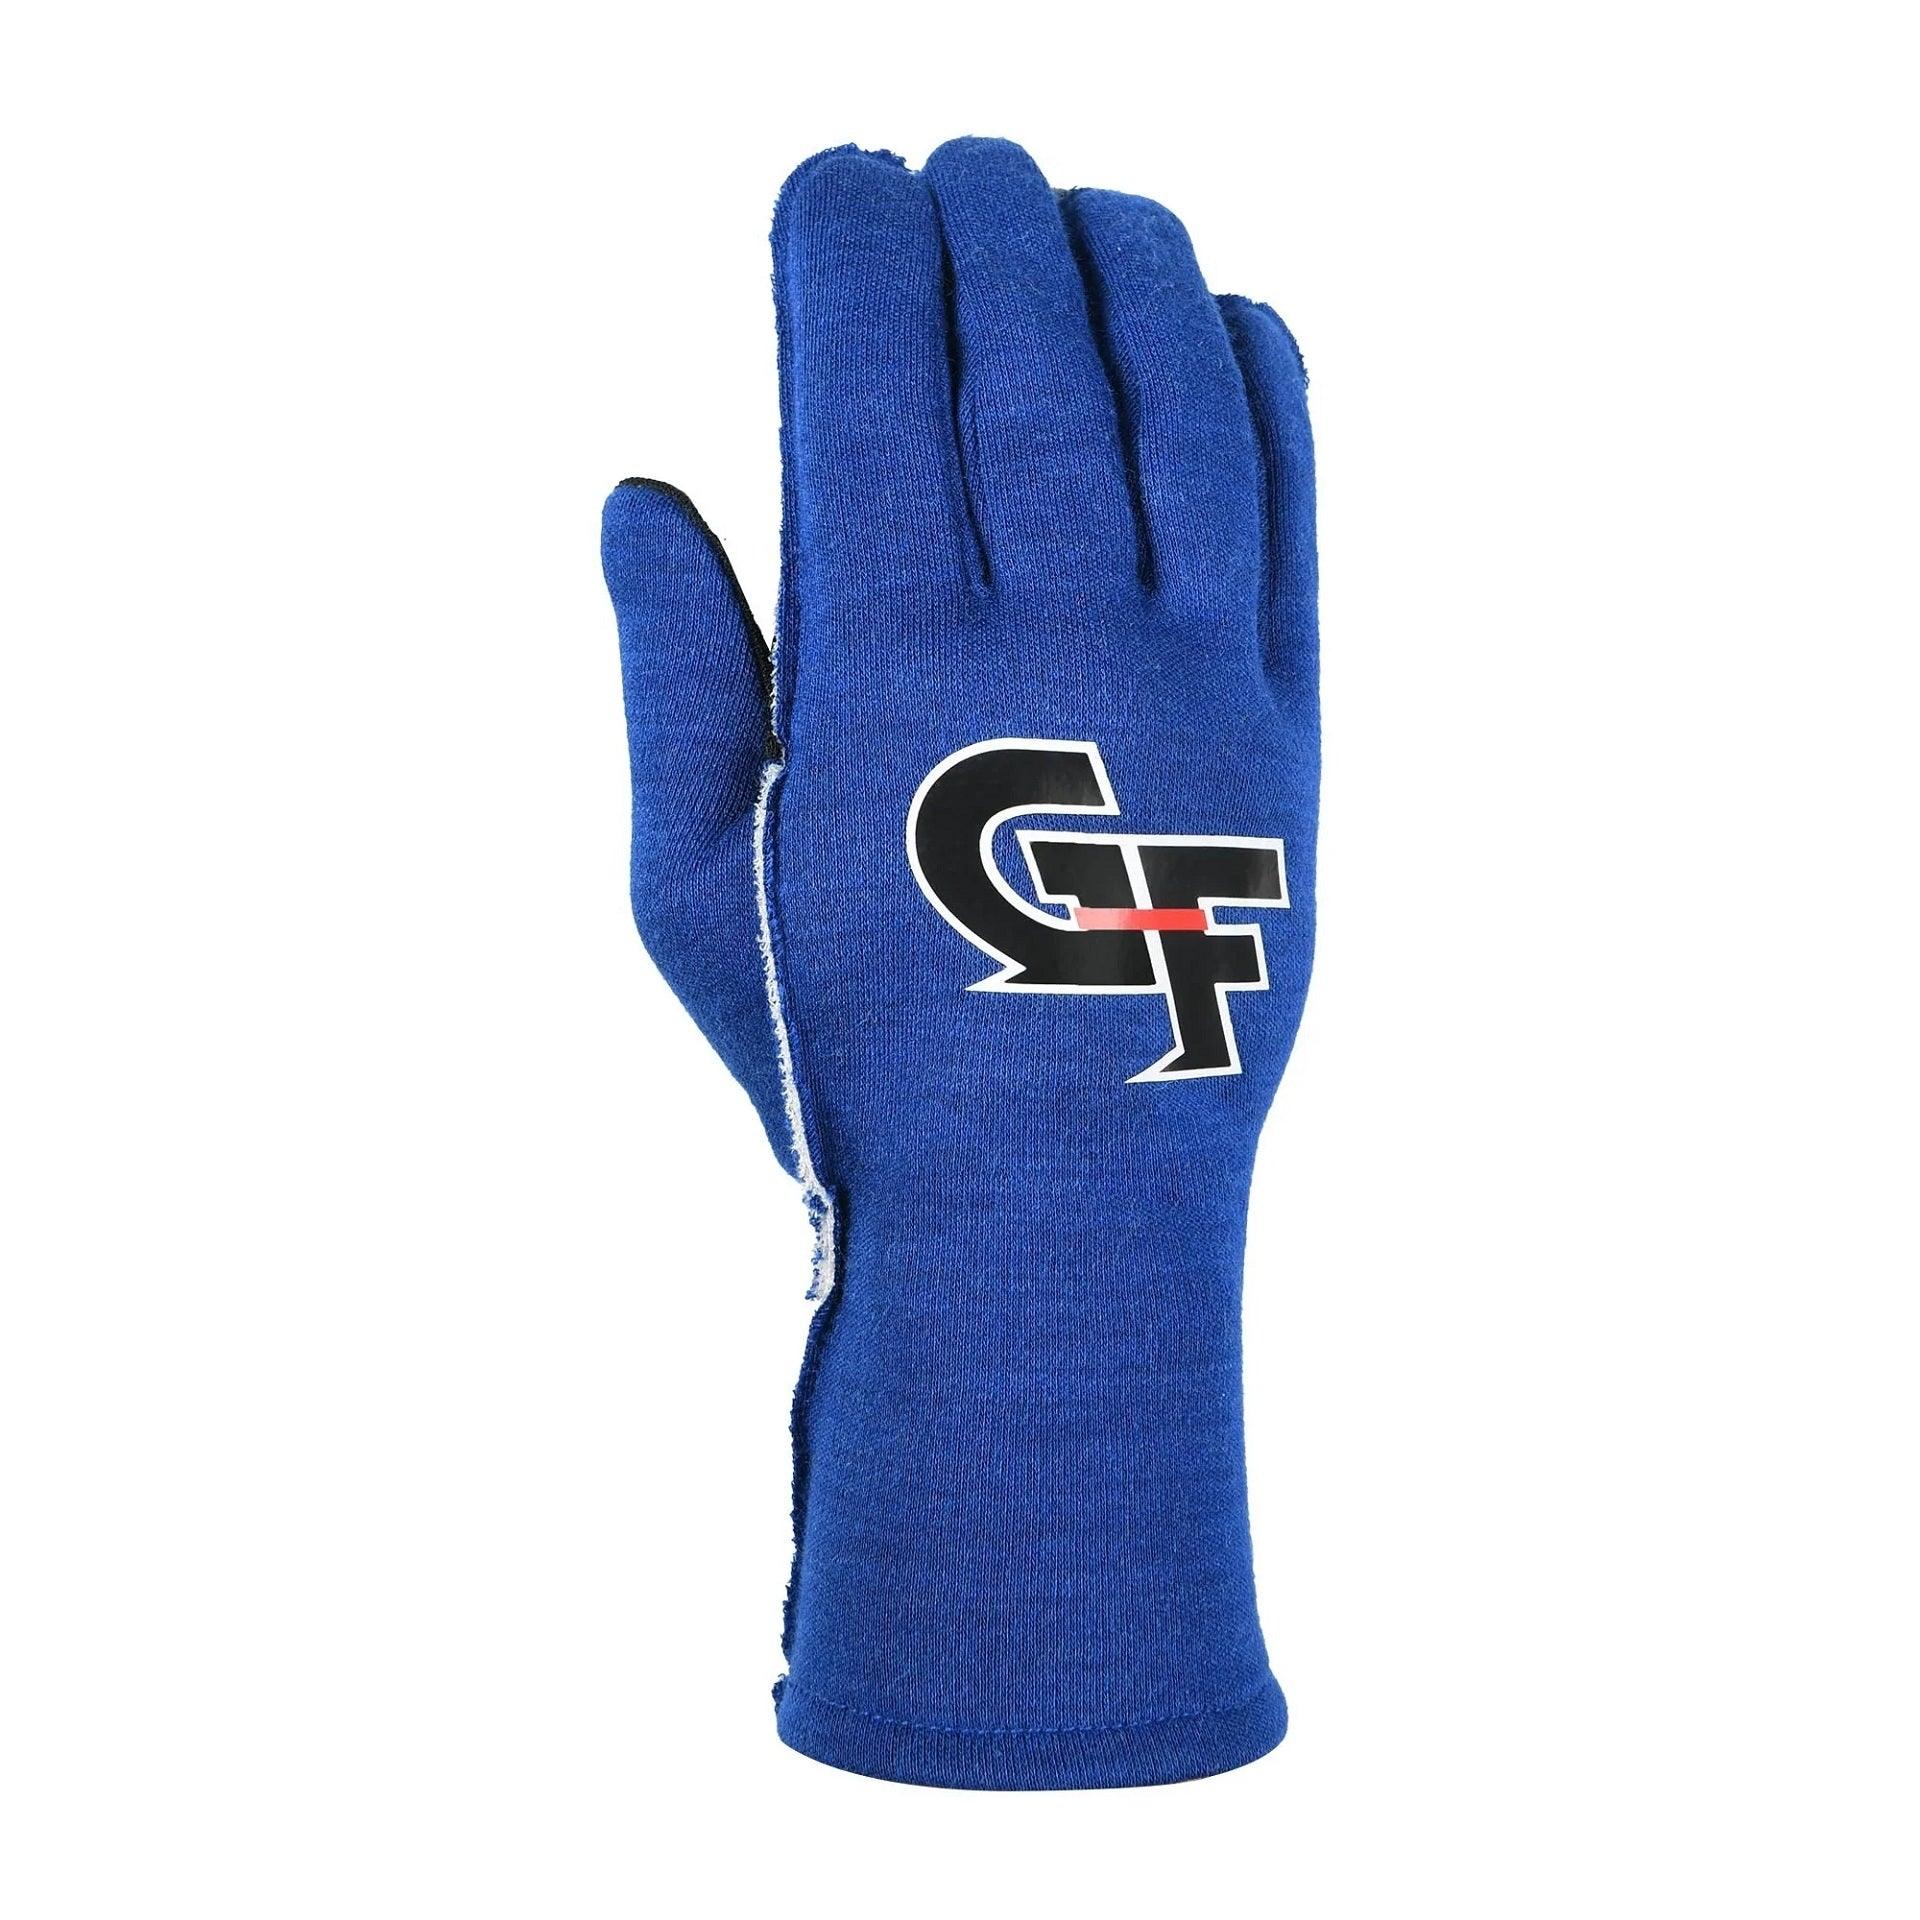 Gloves G-Limit X-Small Blue - Burlile Performance Products